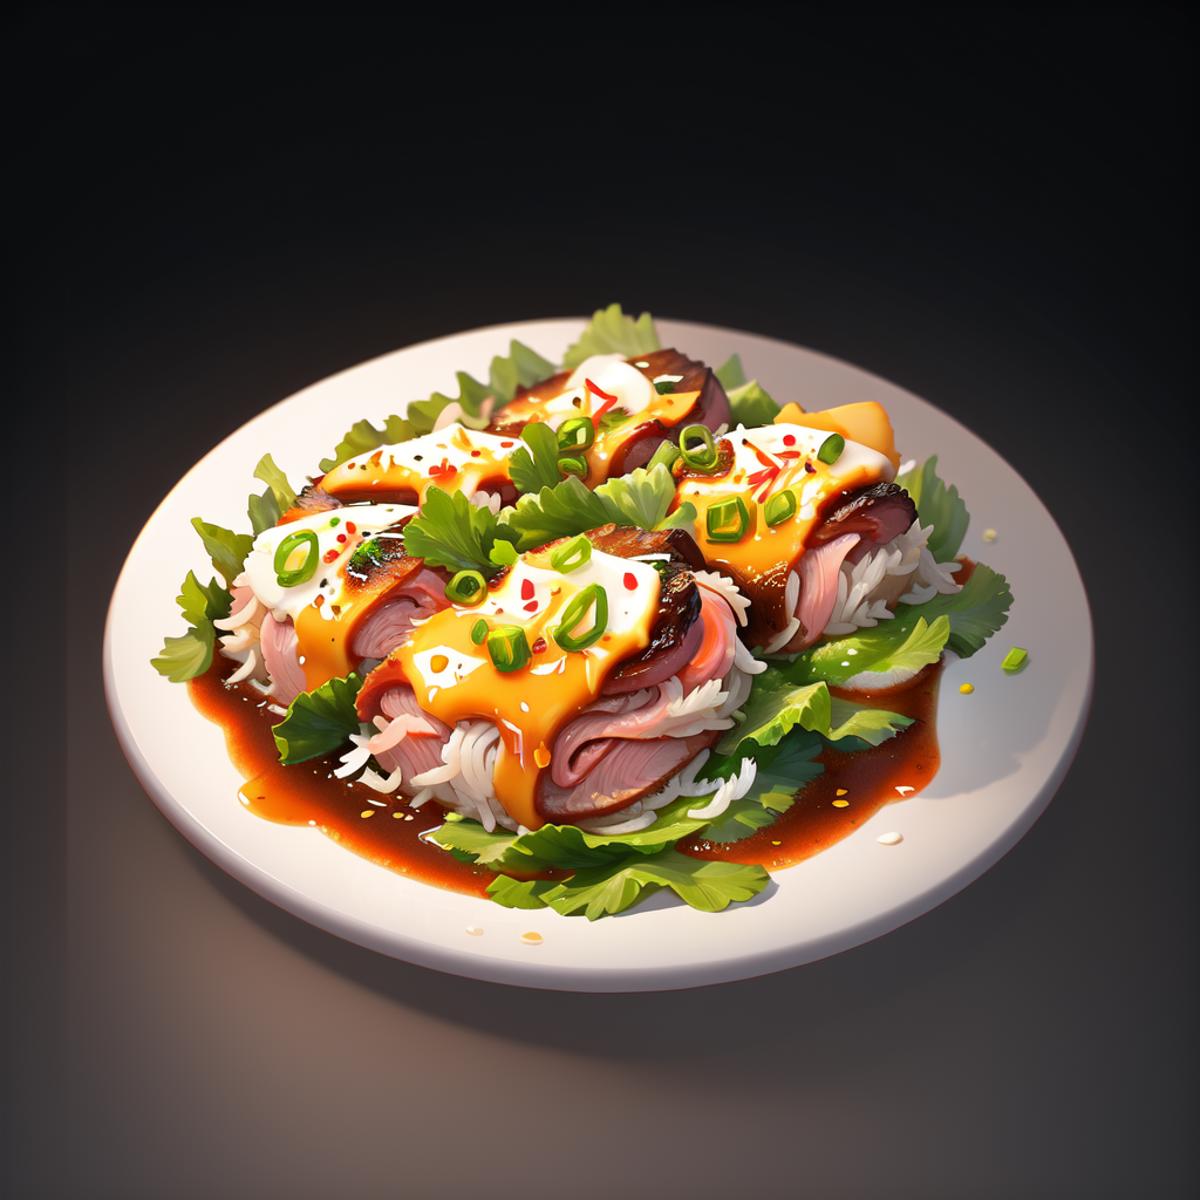 game icon_food image by b1661512103